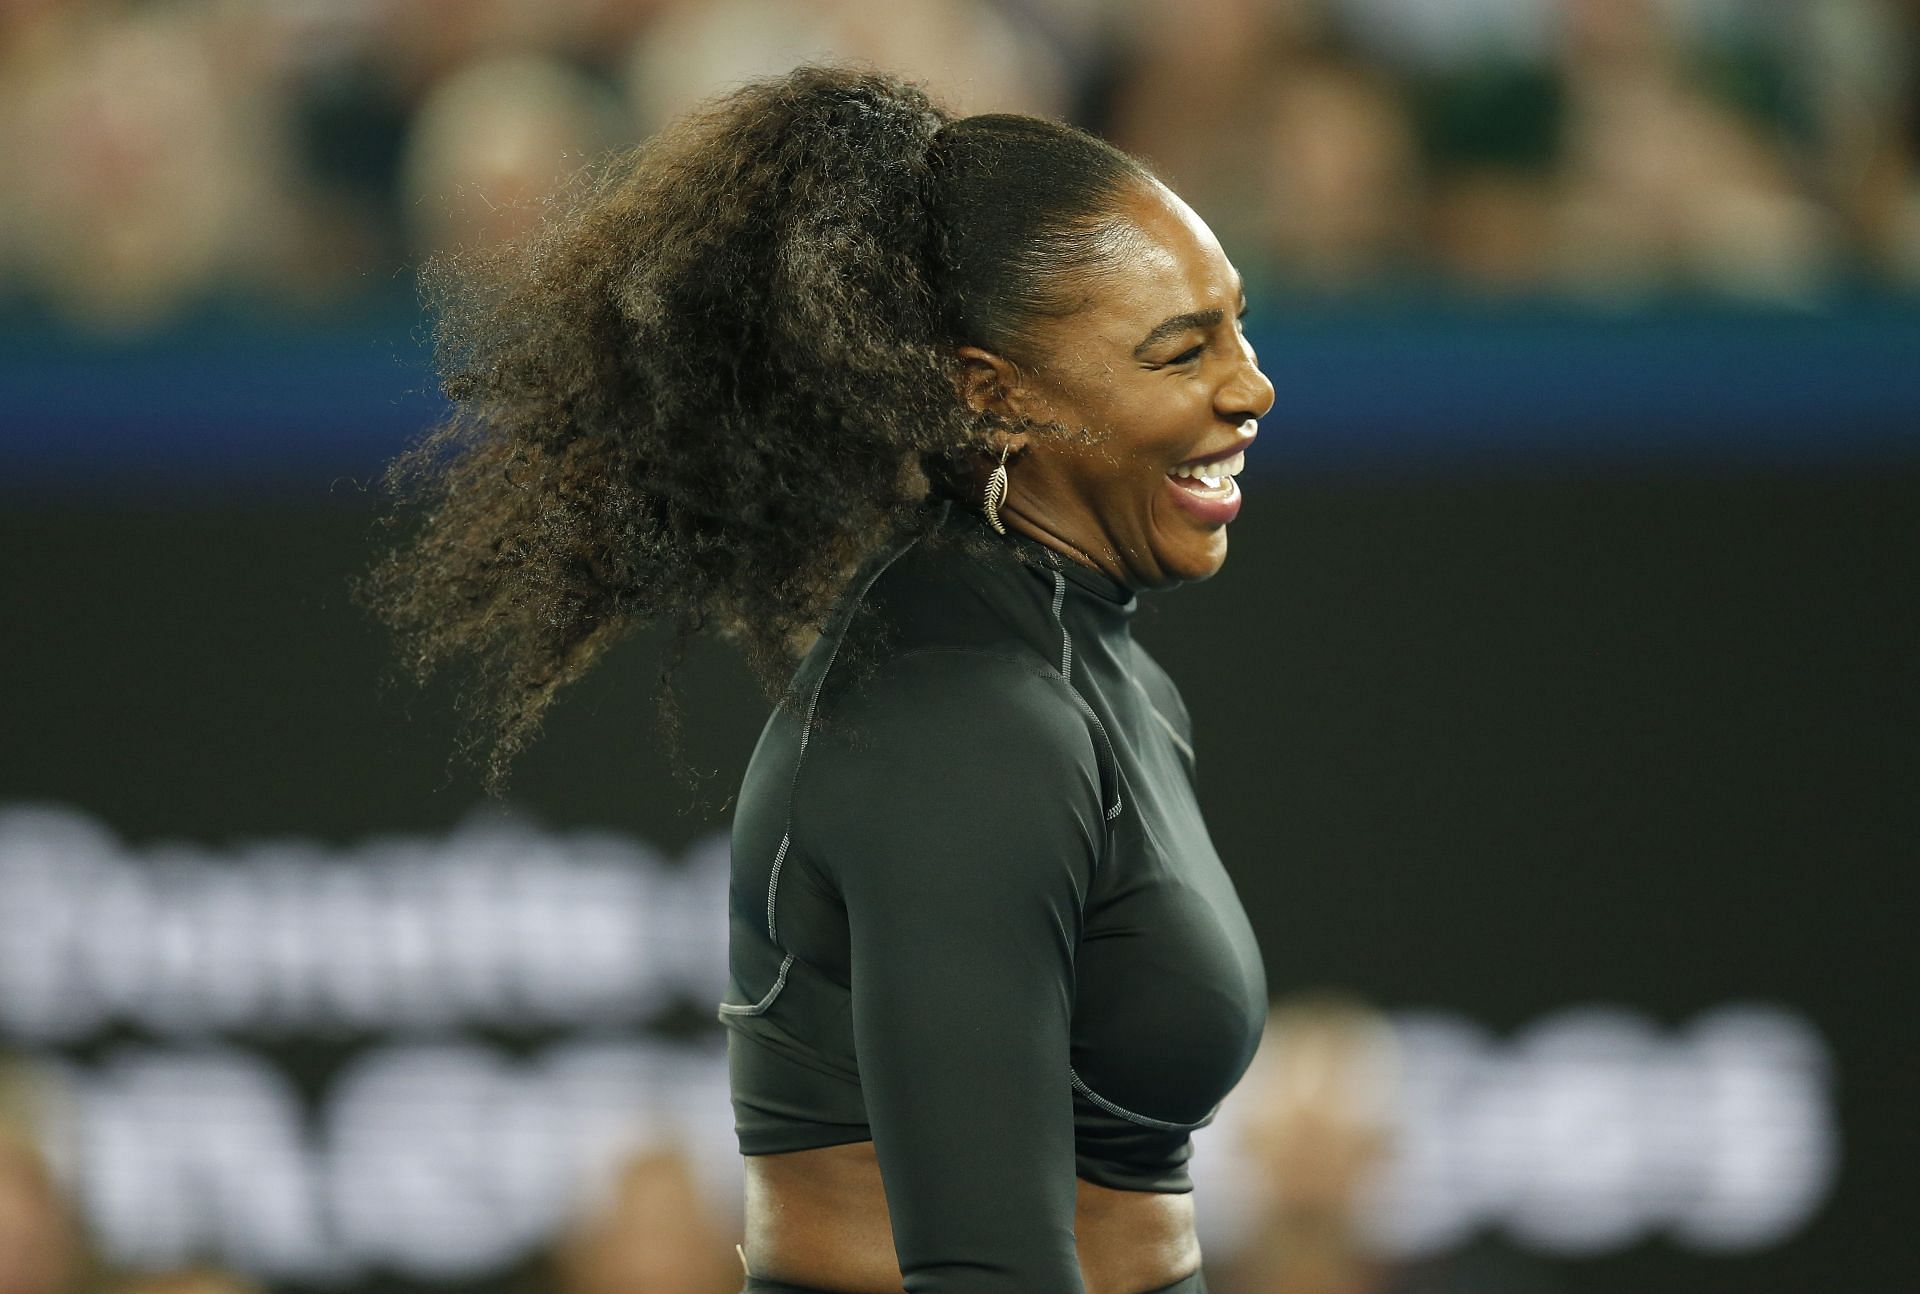 Serena Williams at the Tennis Rally for Relief event in 2020